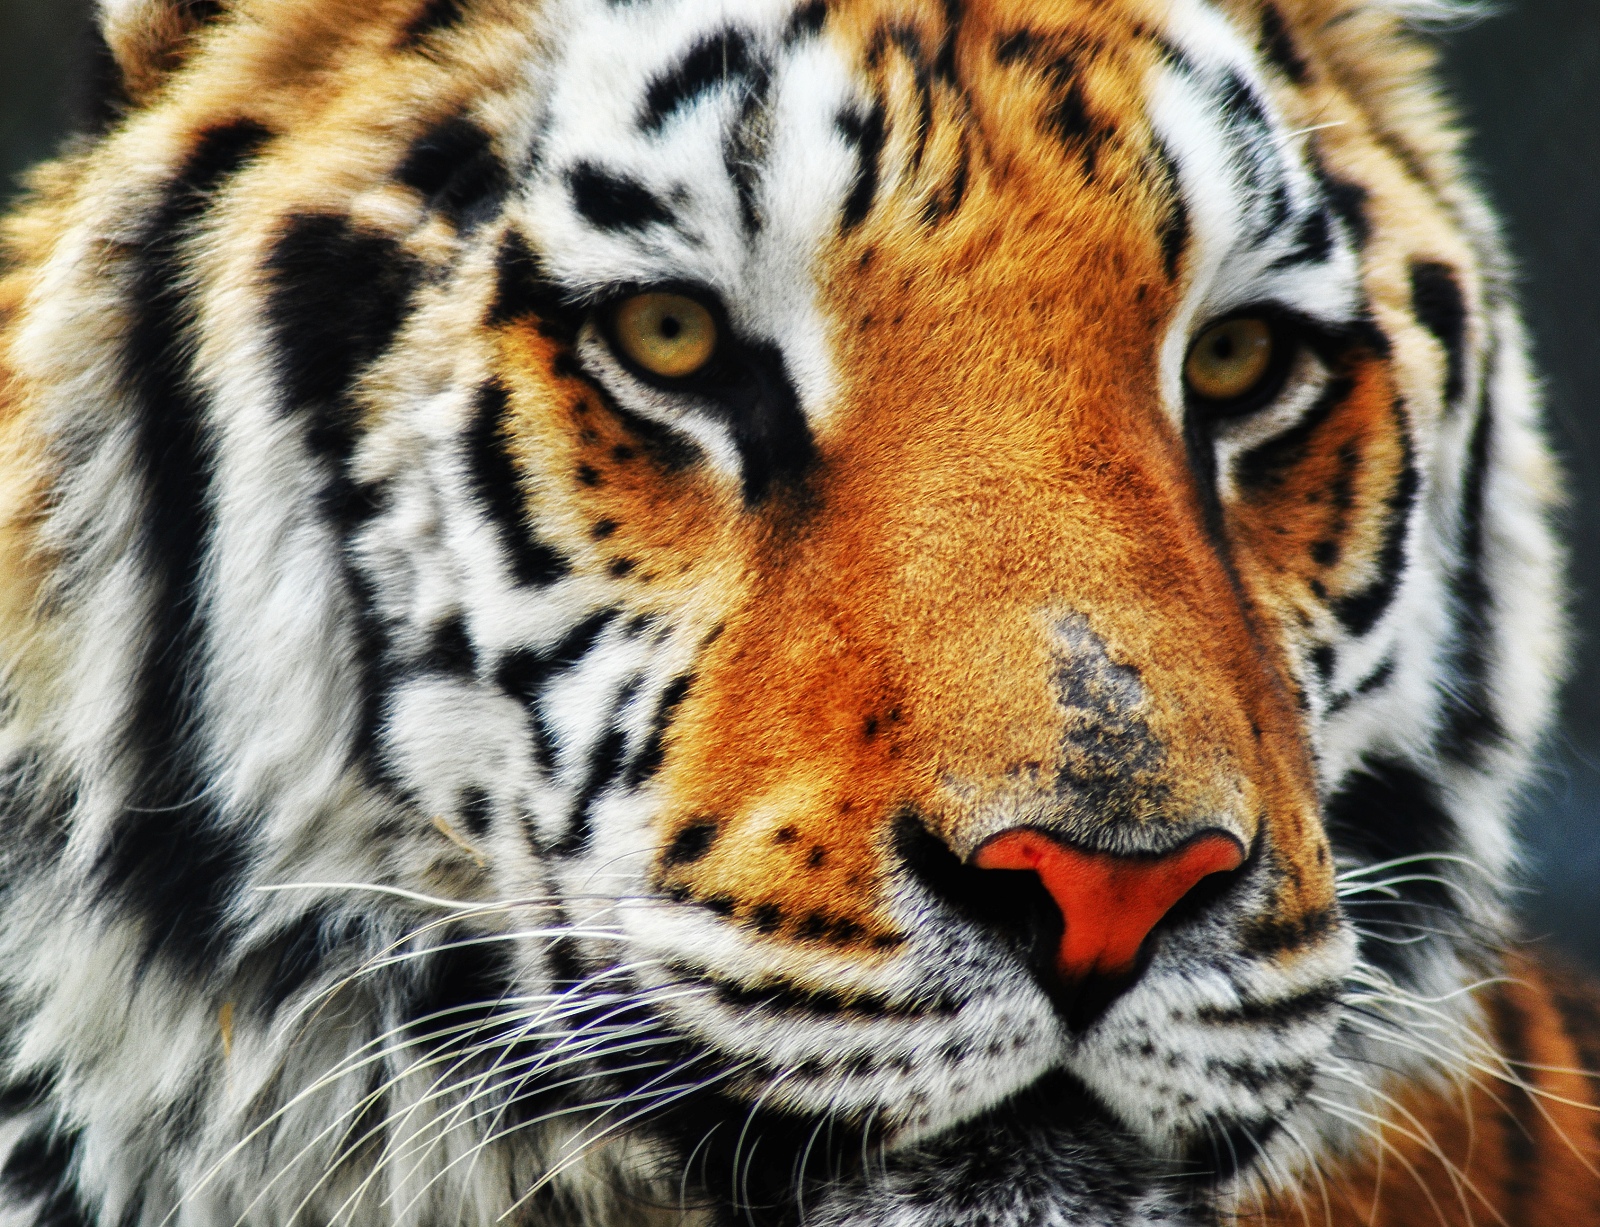 a tiger with an interesting orange and black face